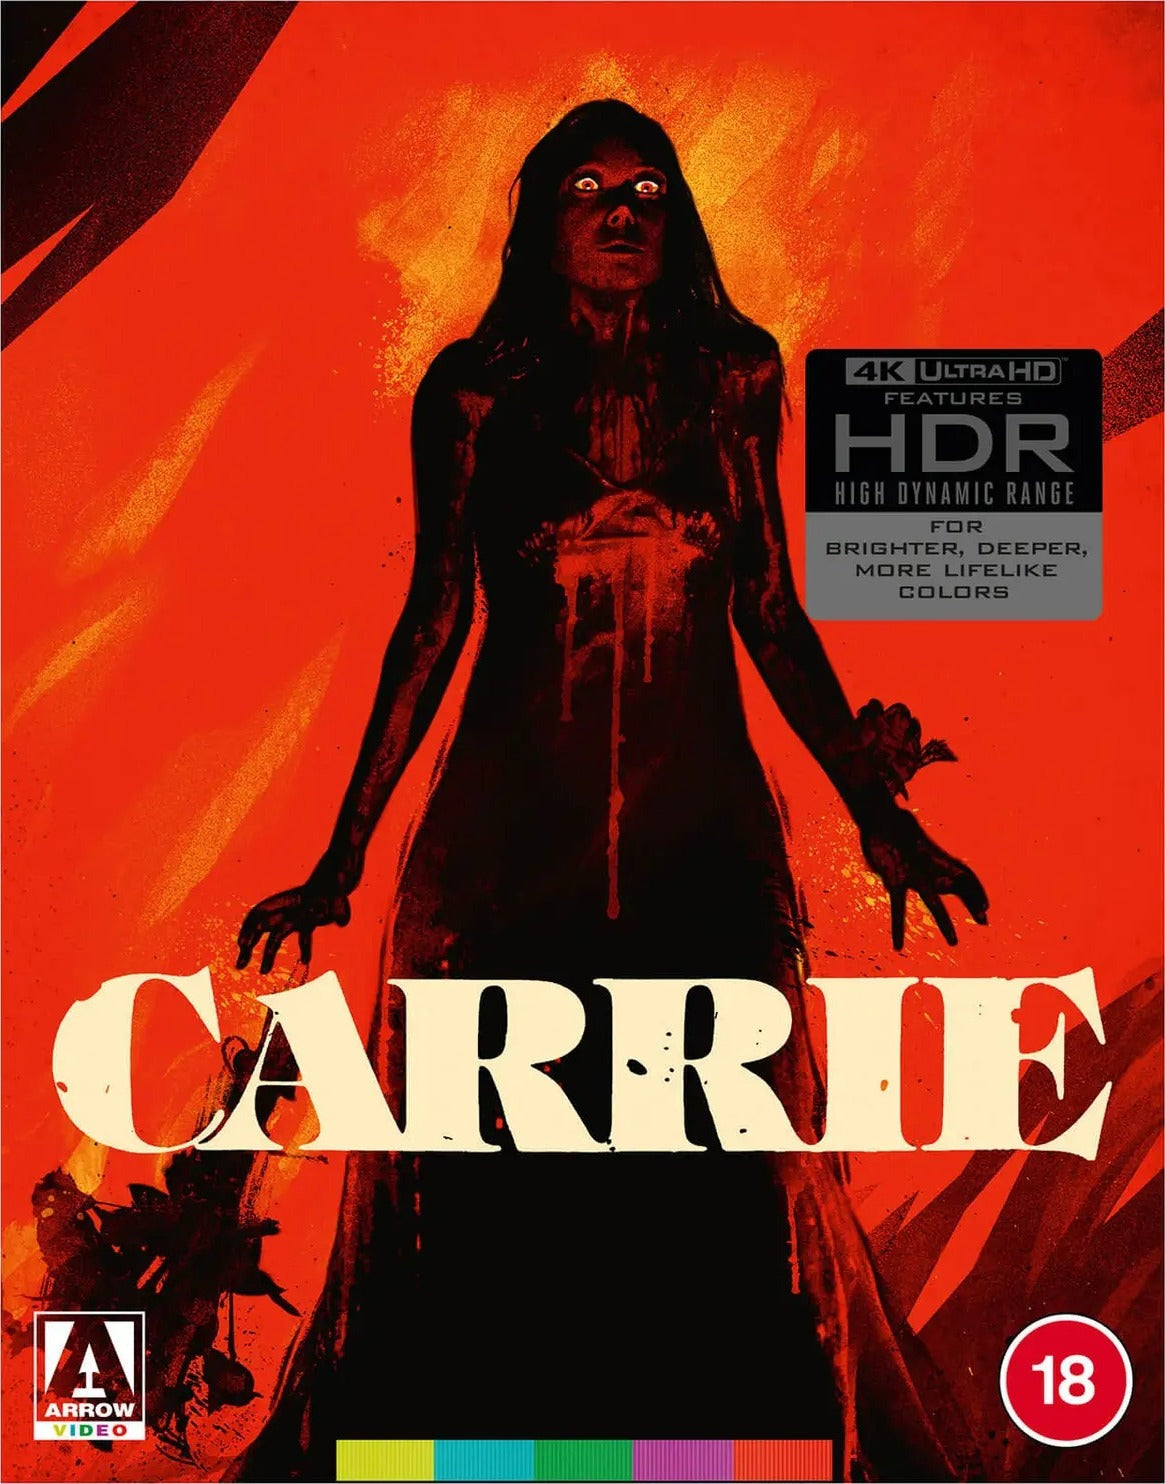 CARRIE (REGION FREE IMPORT - LIMITED EDITION) 4K UHD